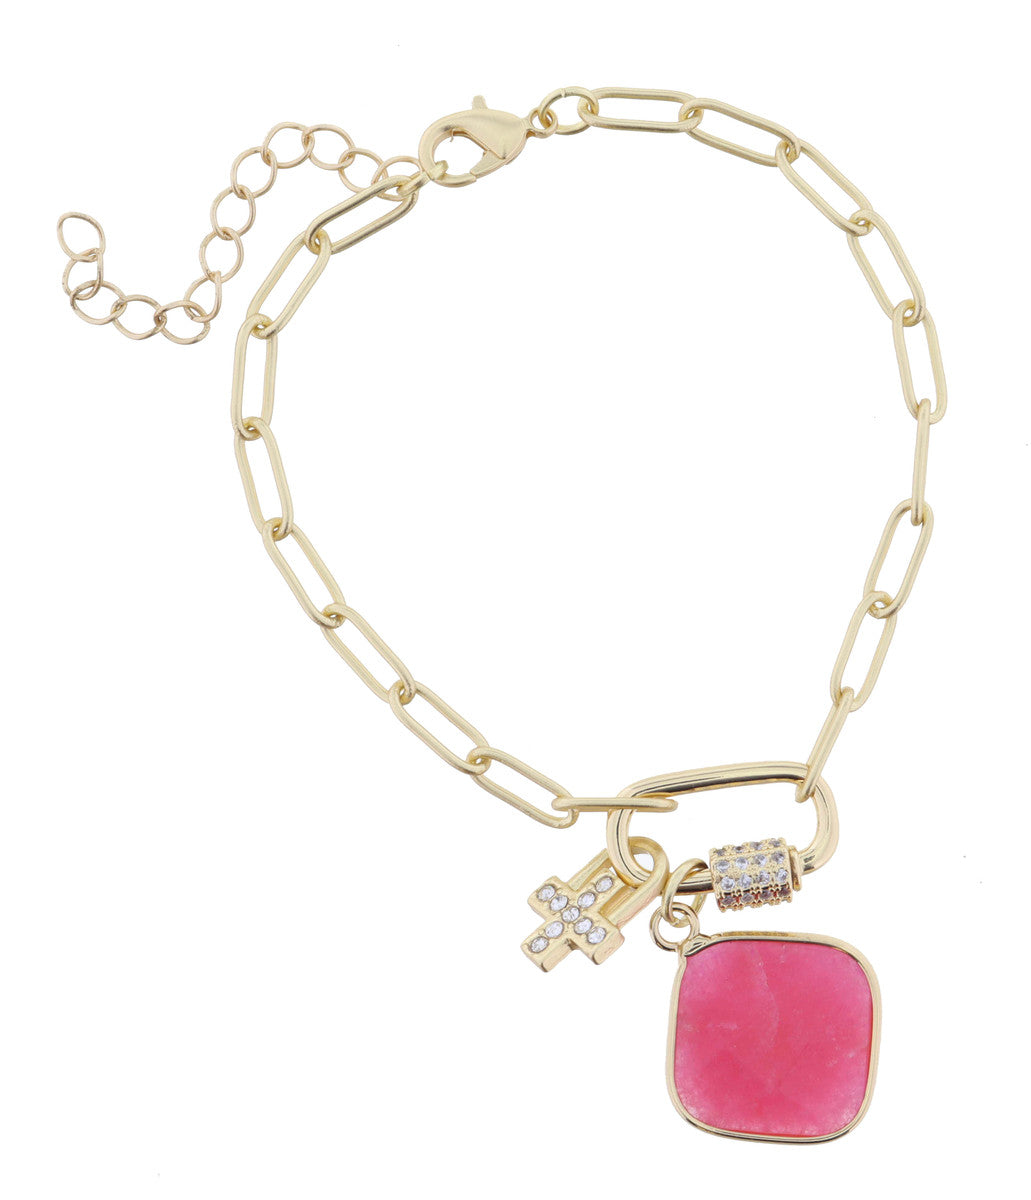 Gold Carabiner with Hot Pink Stone Bracelet